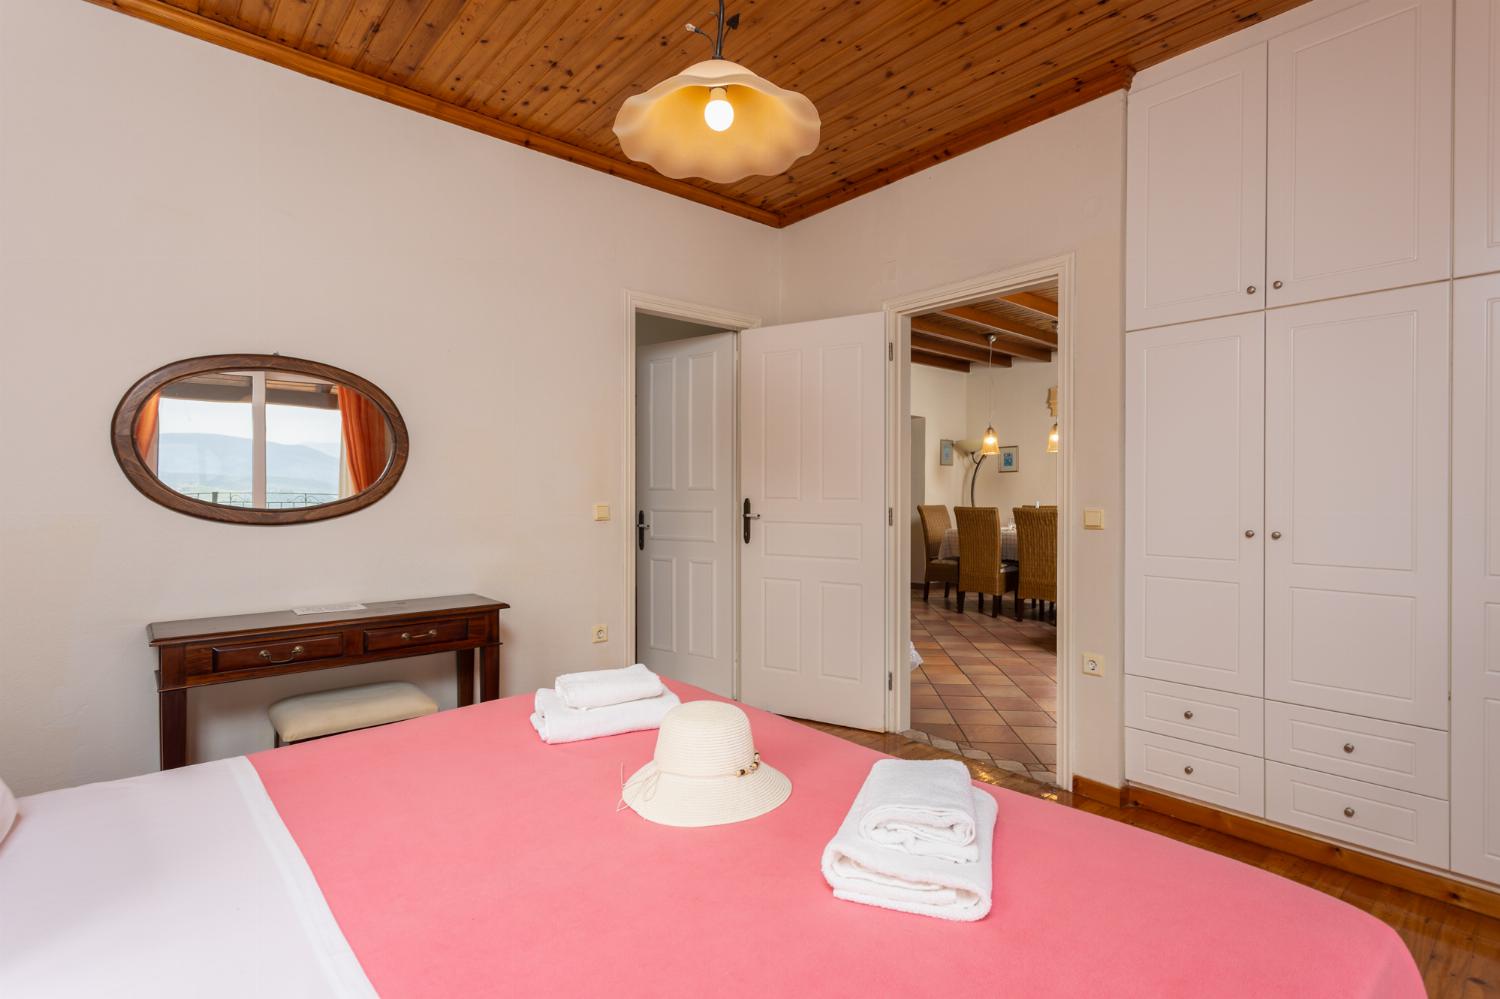 Double bedroom on first floor with en suite bathroom, A/C, and sea views